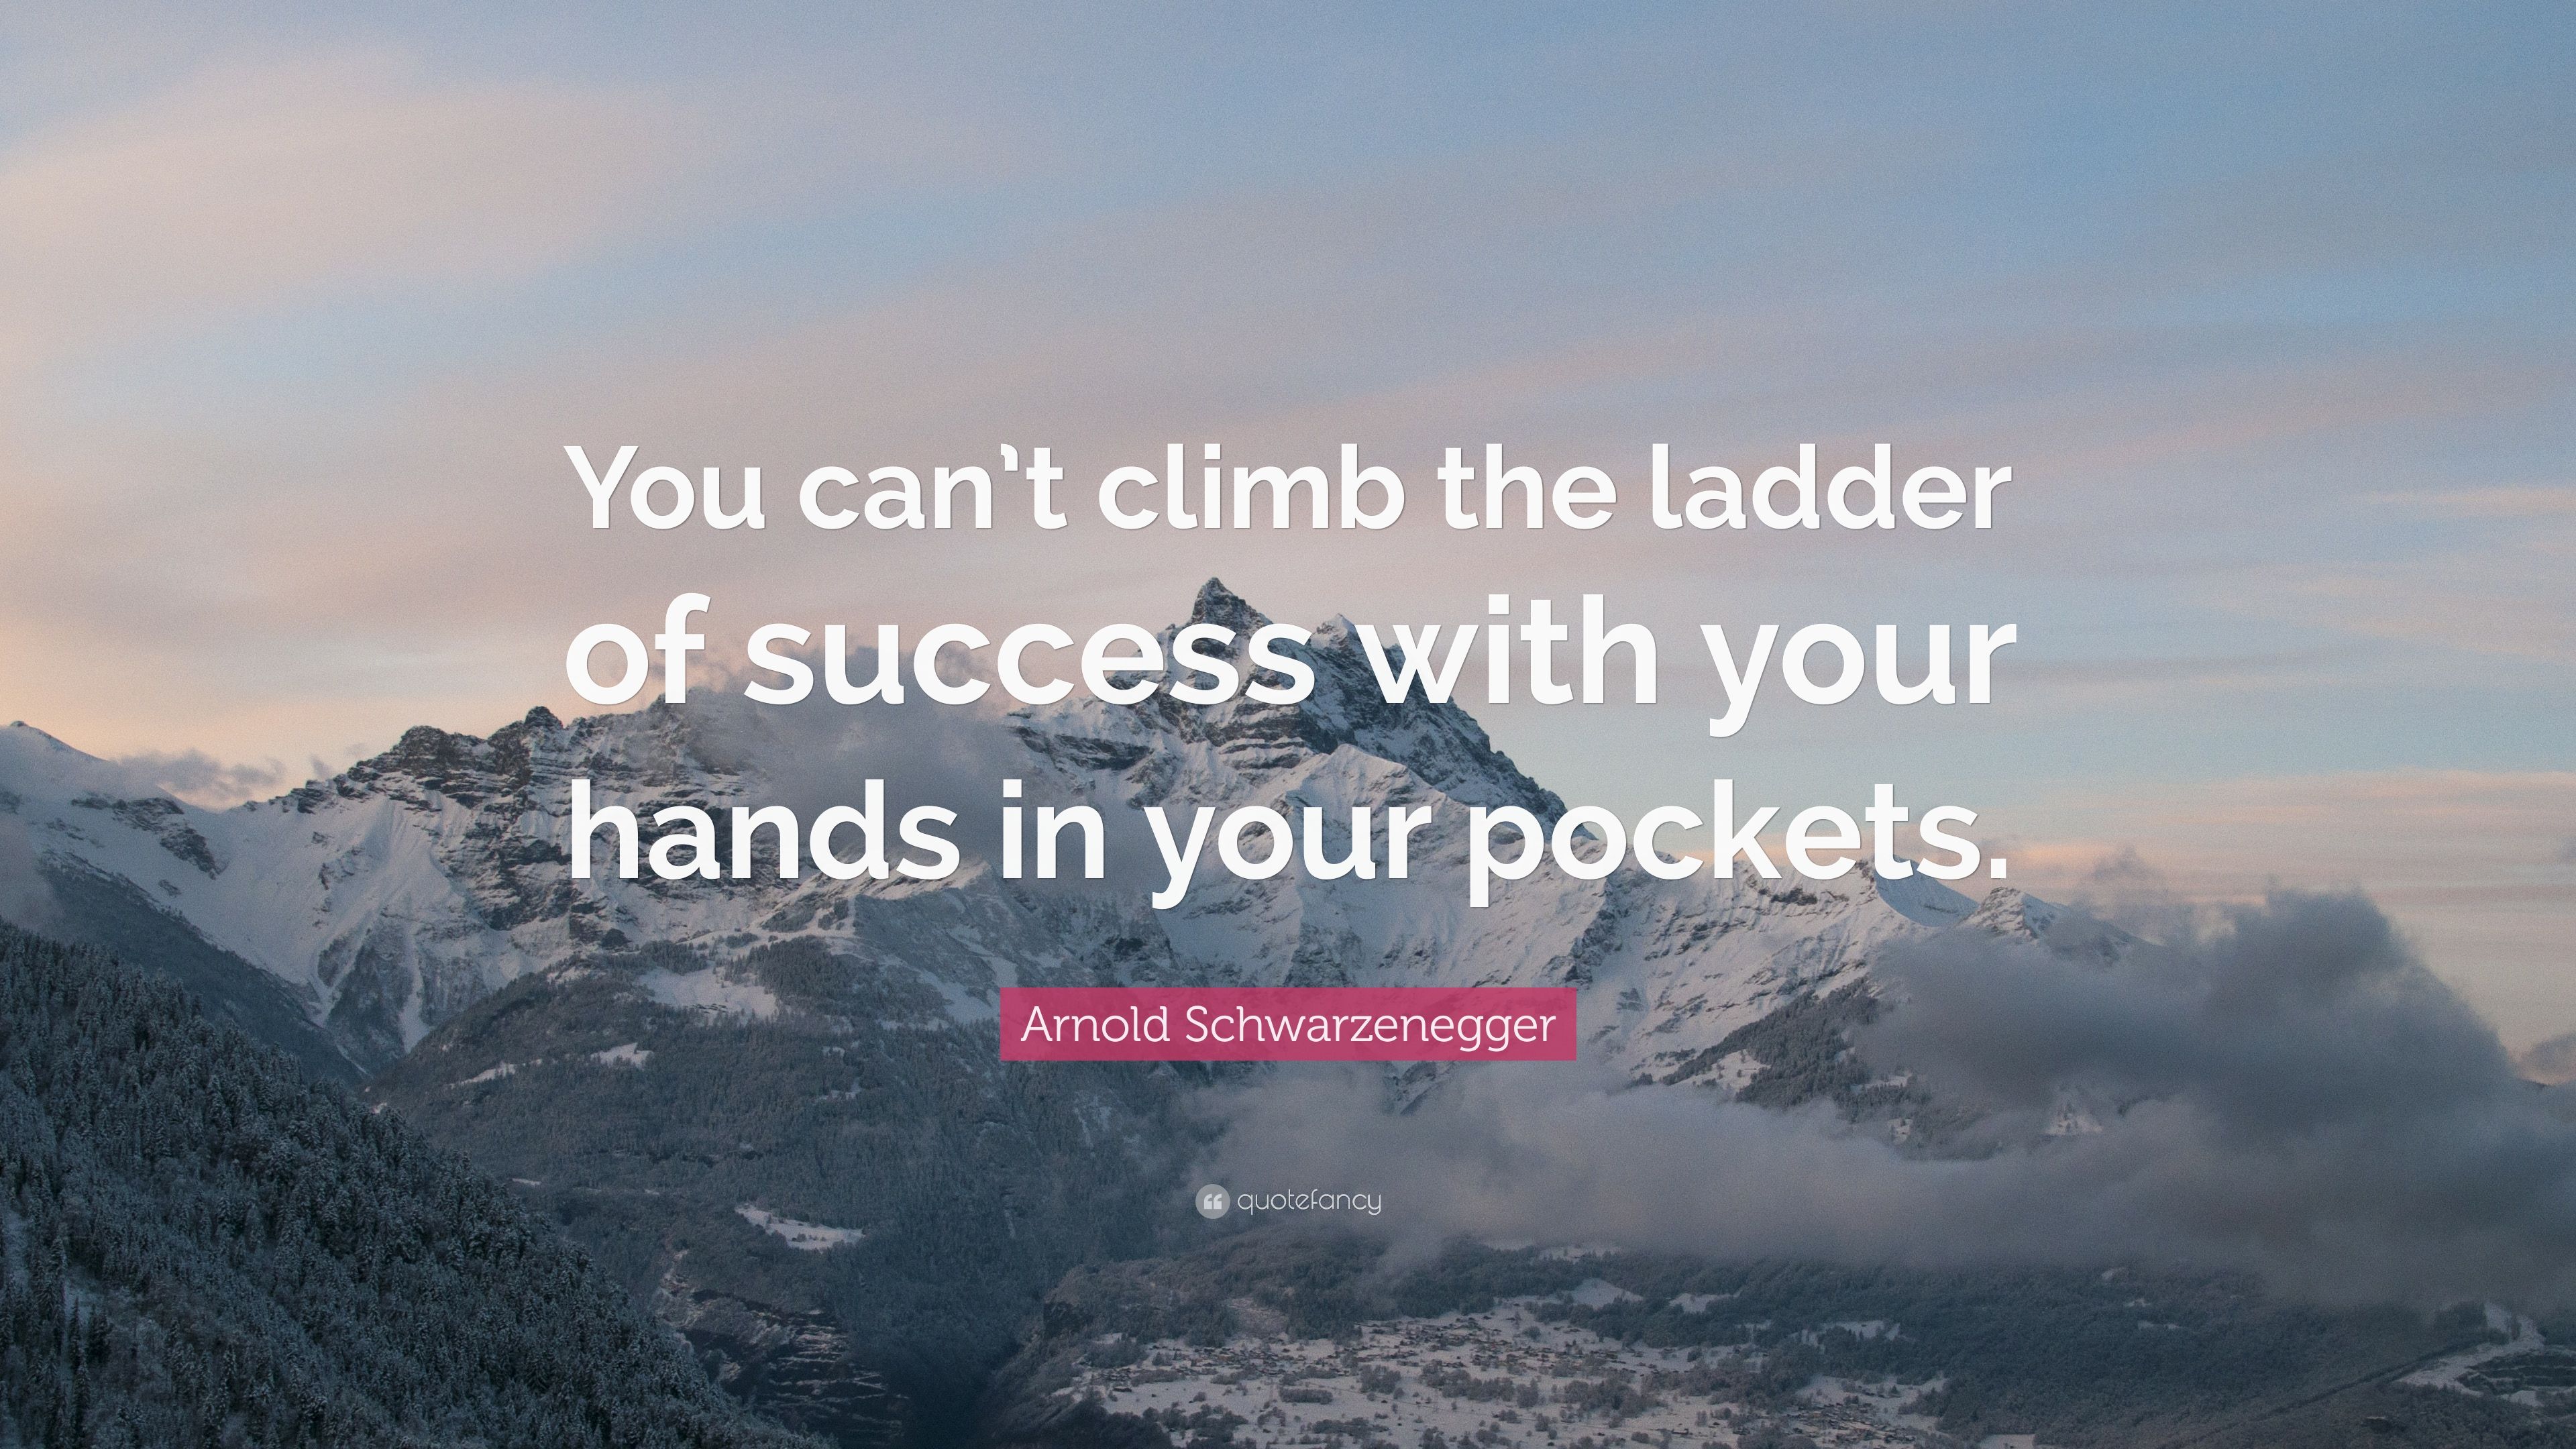 Arnold Schwarzenegger Quote: “You can't climb the ladder of success